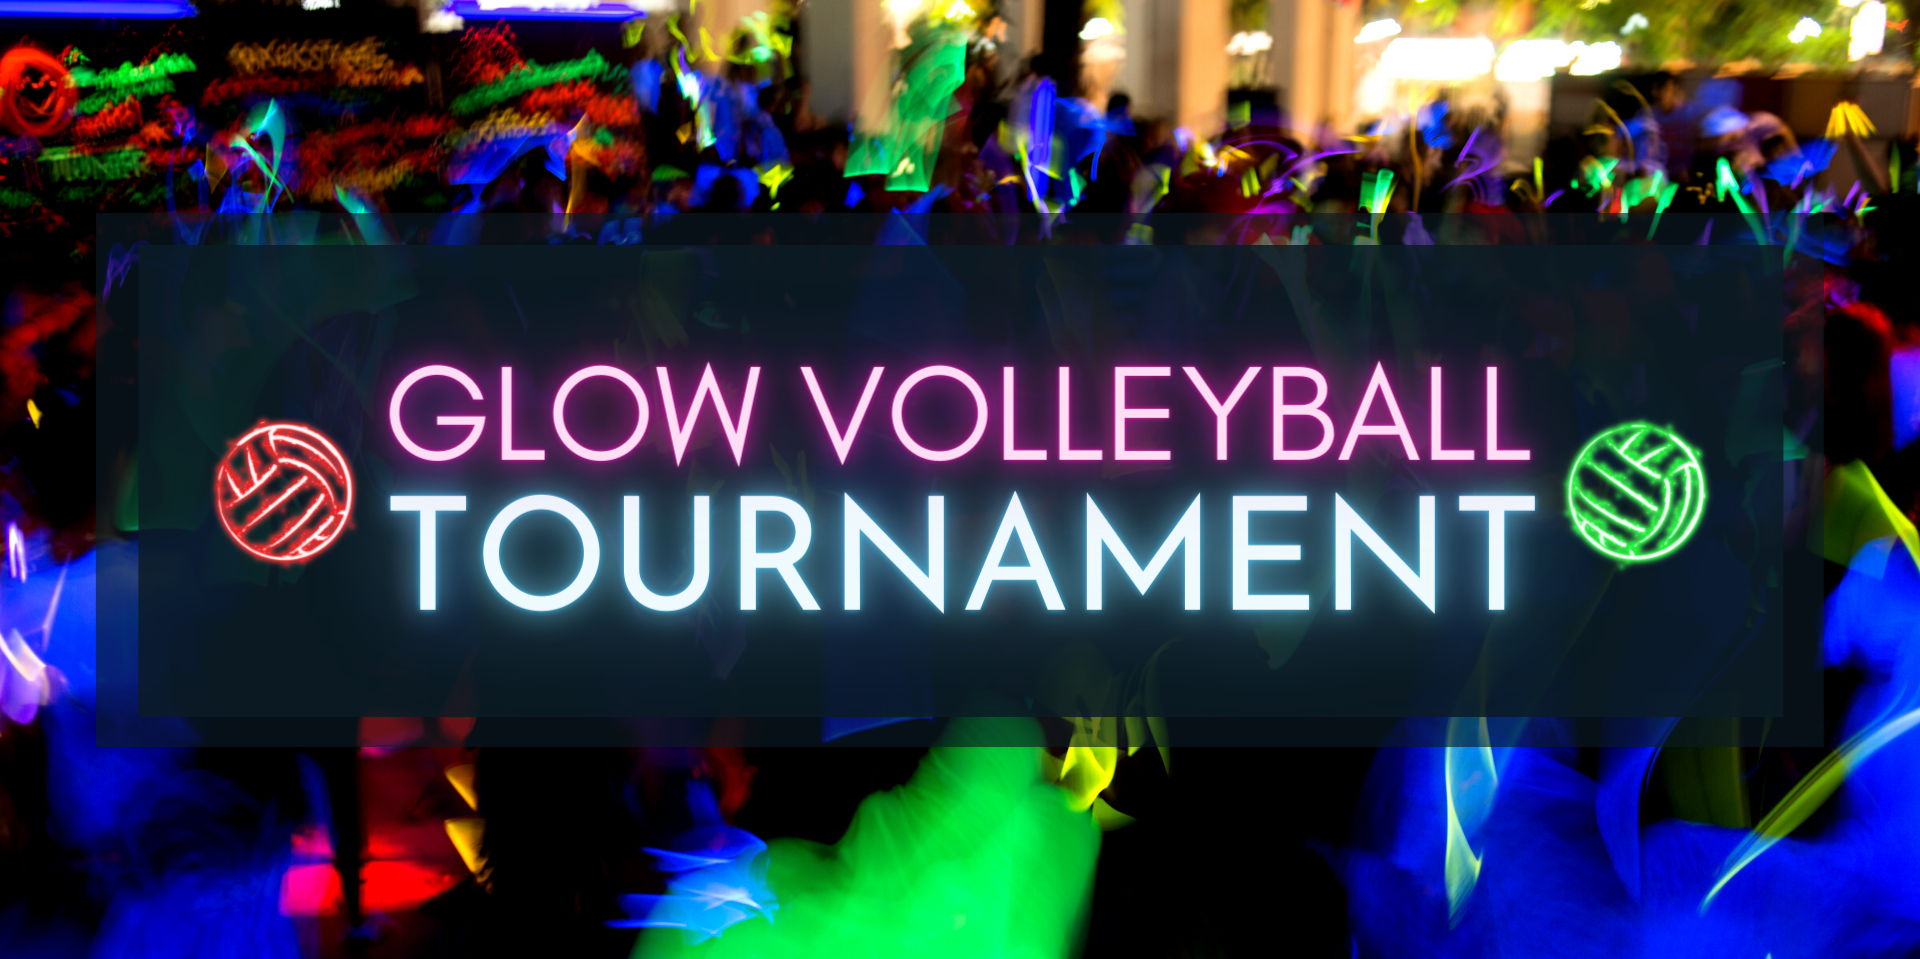 GLOW Volleyball Tournament promotional image